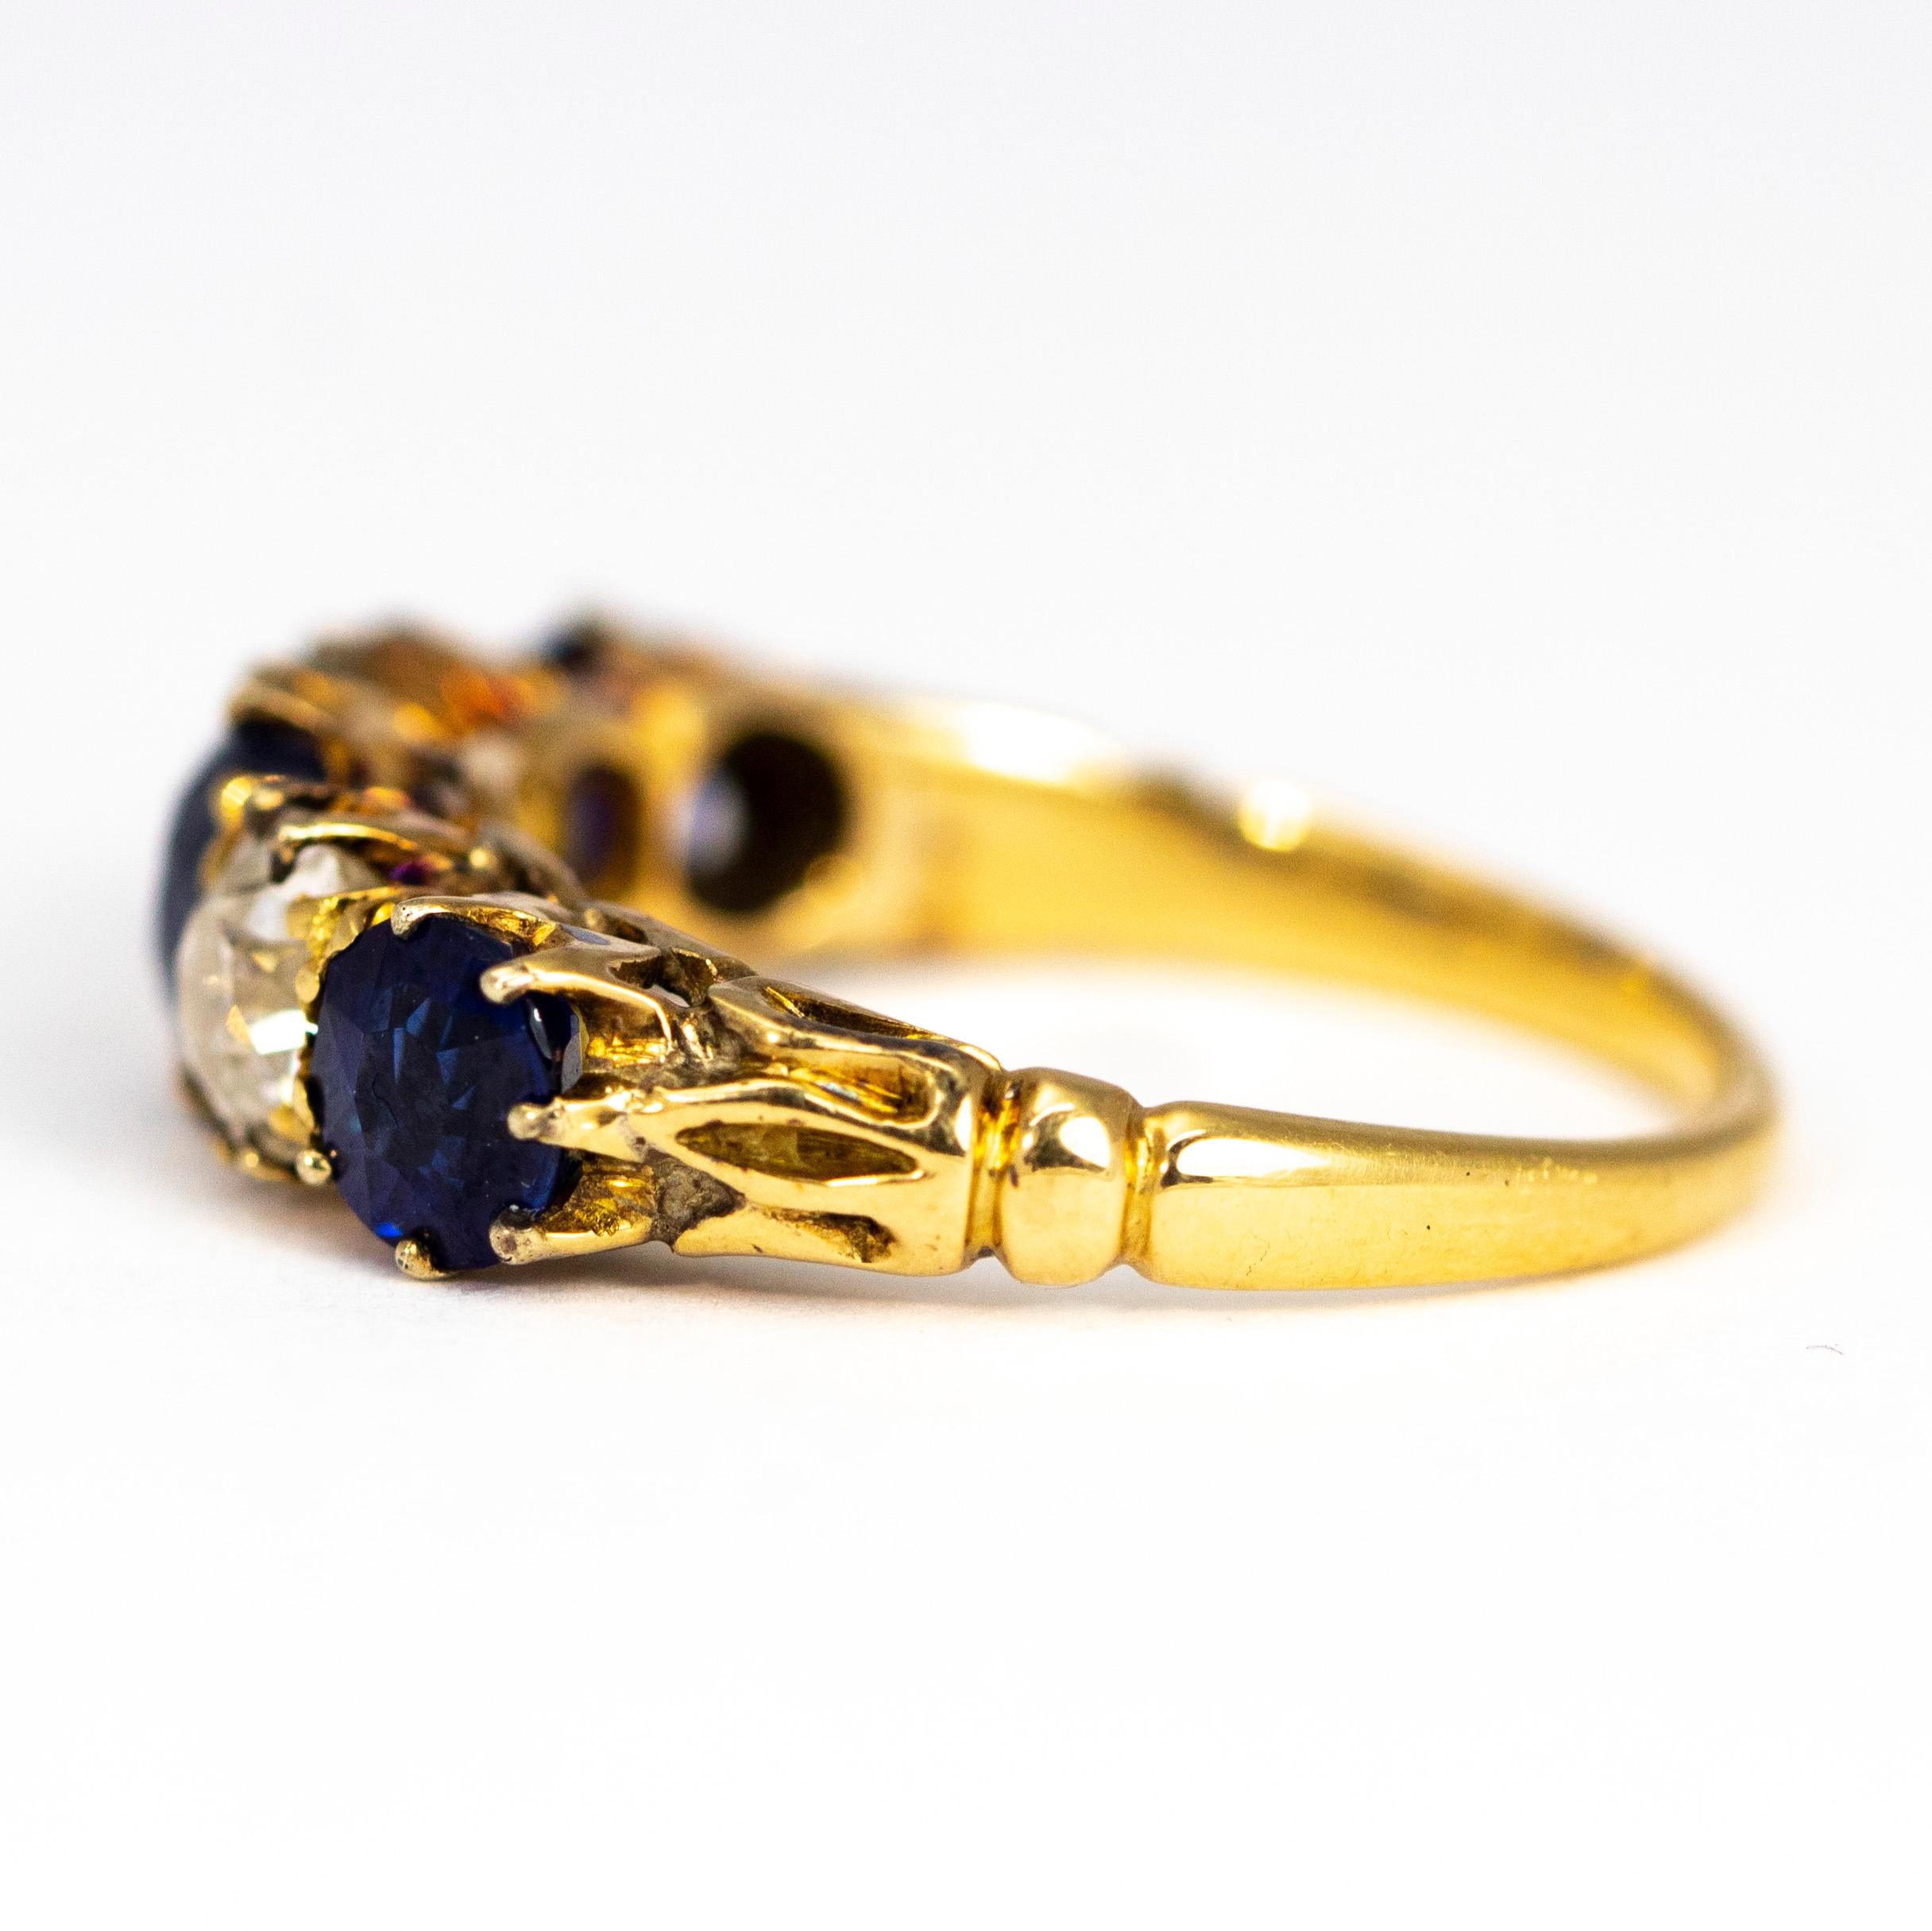 Edwardian Antique Sapphire and Diamond 18 Carat Gold Five-Stone Ring